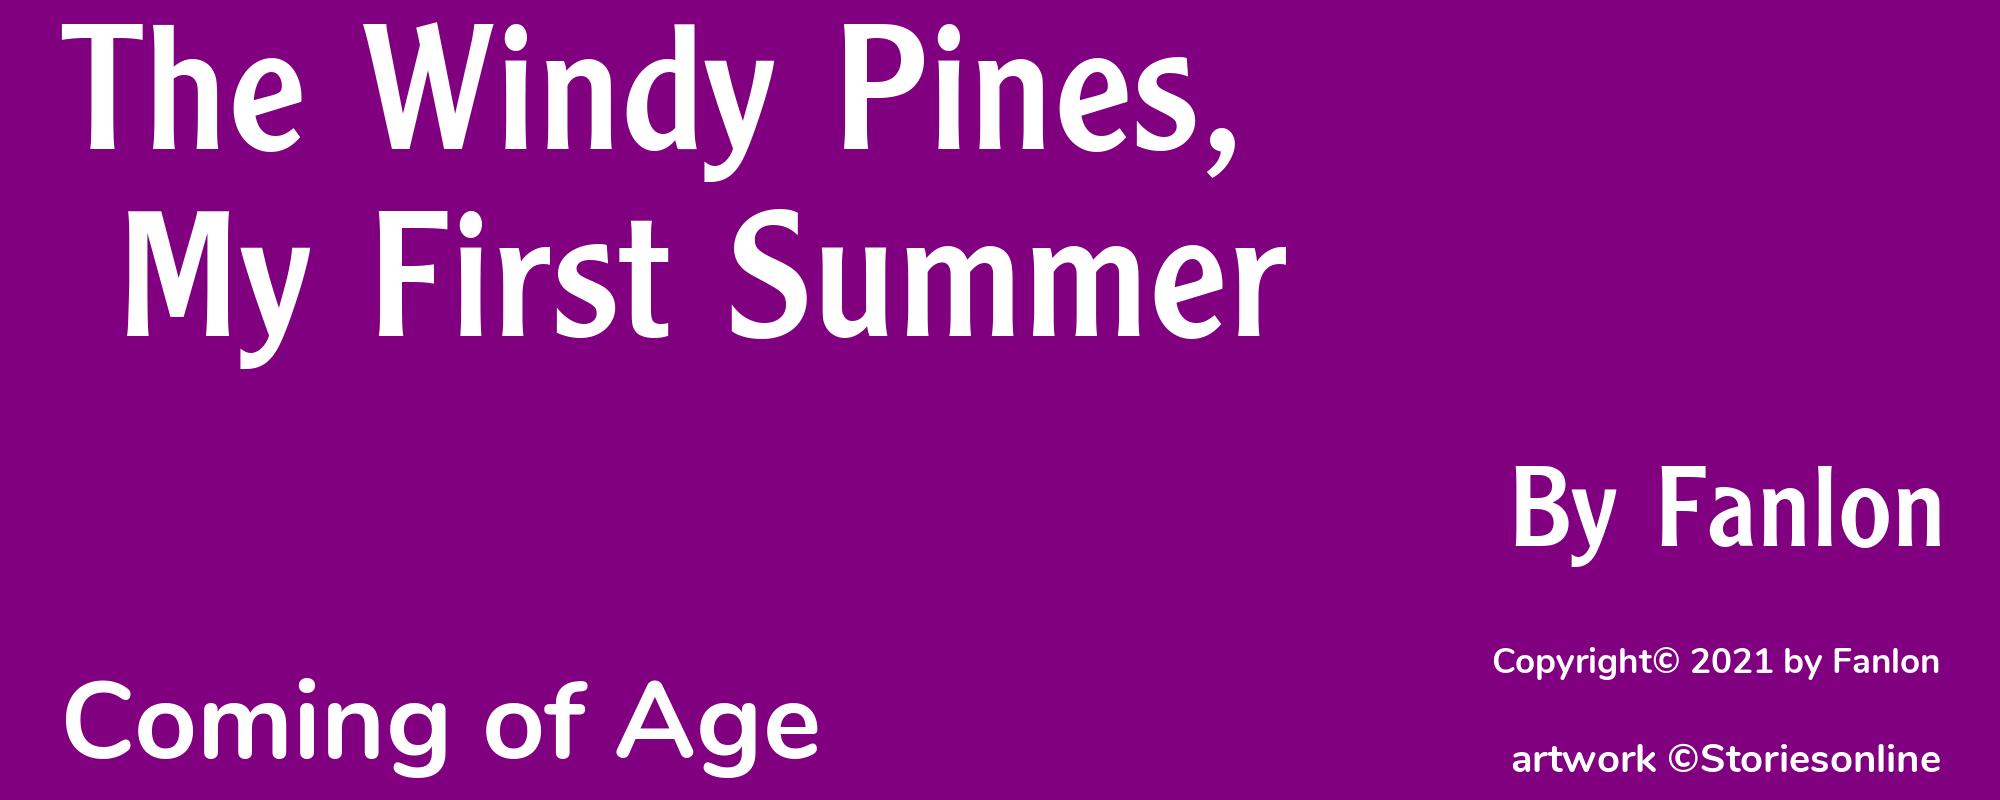 The Windy Pines, My First Summer - Cover